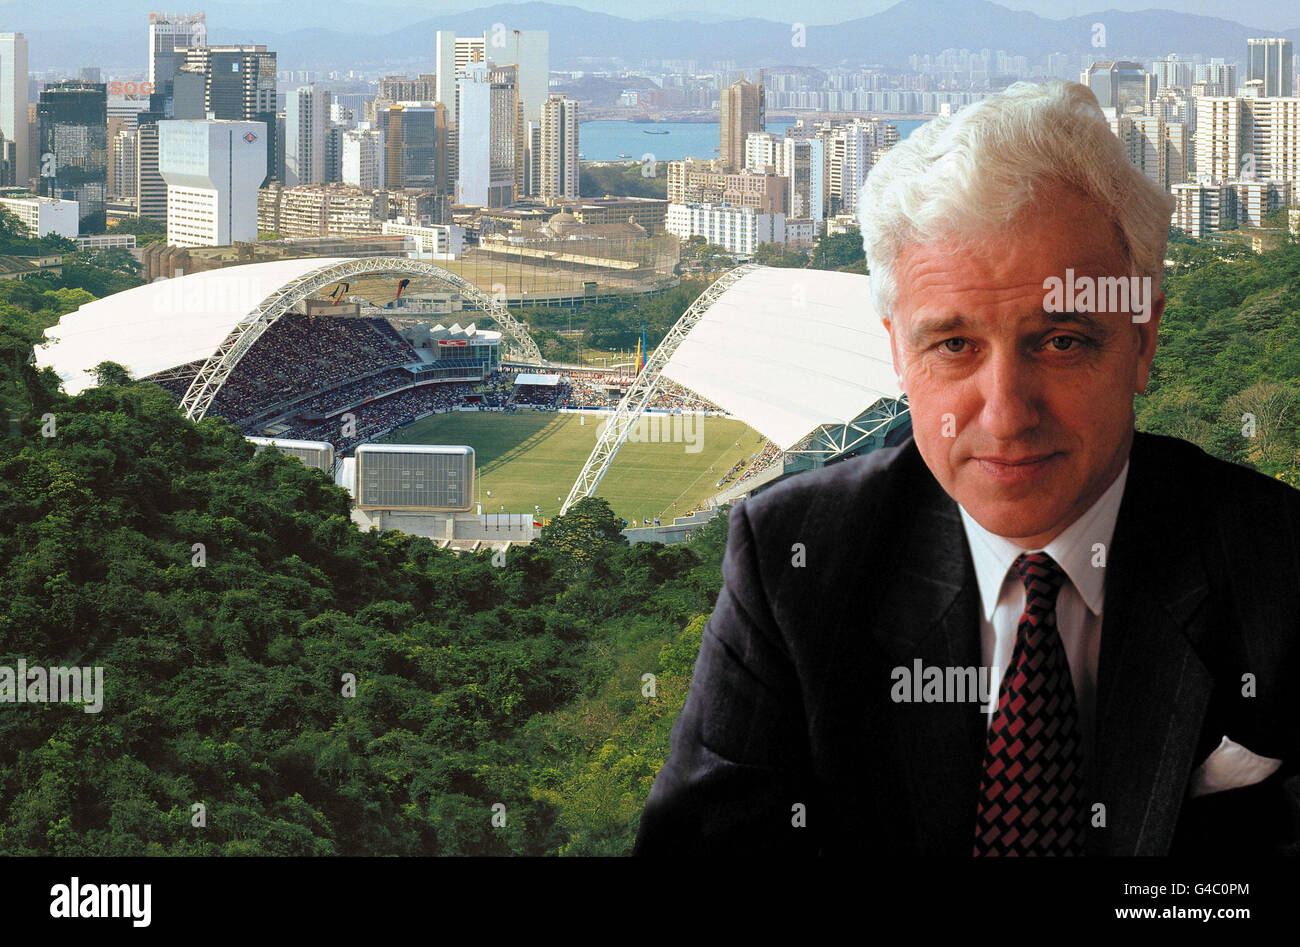 The new Hong Kong Stadium constructed from British Steel in the background with (inset) Sir Brian Moffat, Chairman & Chief Executive of British Steel plc, whose results are announced today (Monday). British Steel is fighting back with a 3-part strategy to restore the Company's competitiveness, in response to the adverse effects of the strength of Sterling and the economic crises in the Far East. Photo PA. Stock Photo